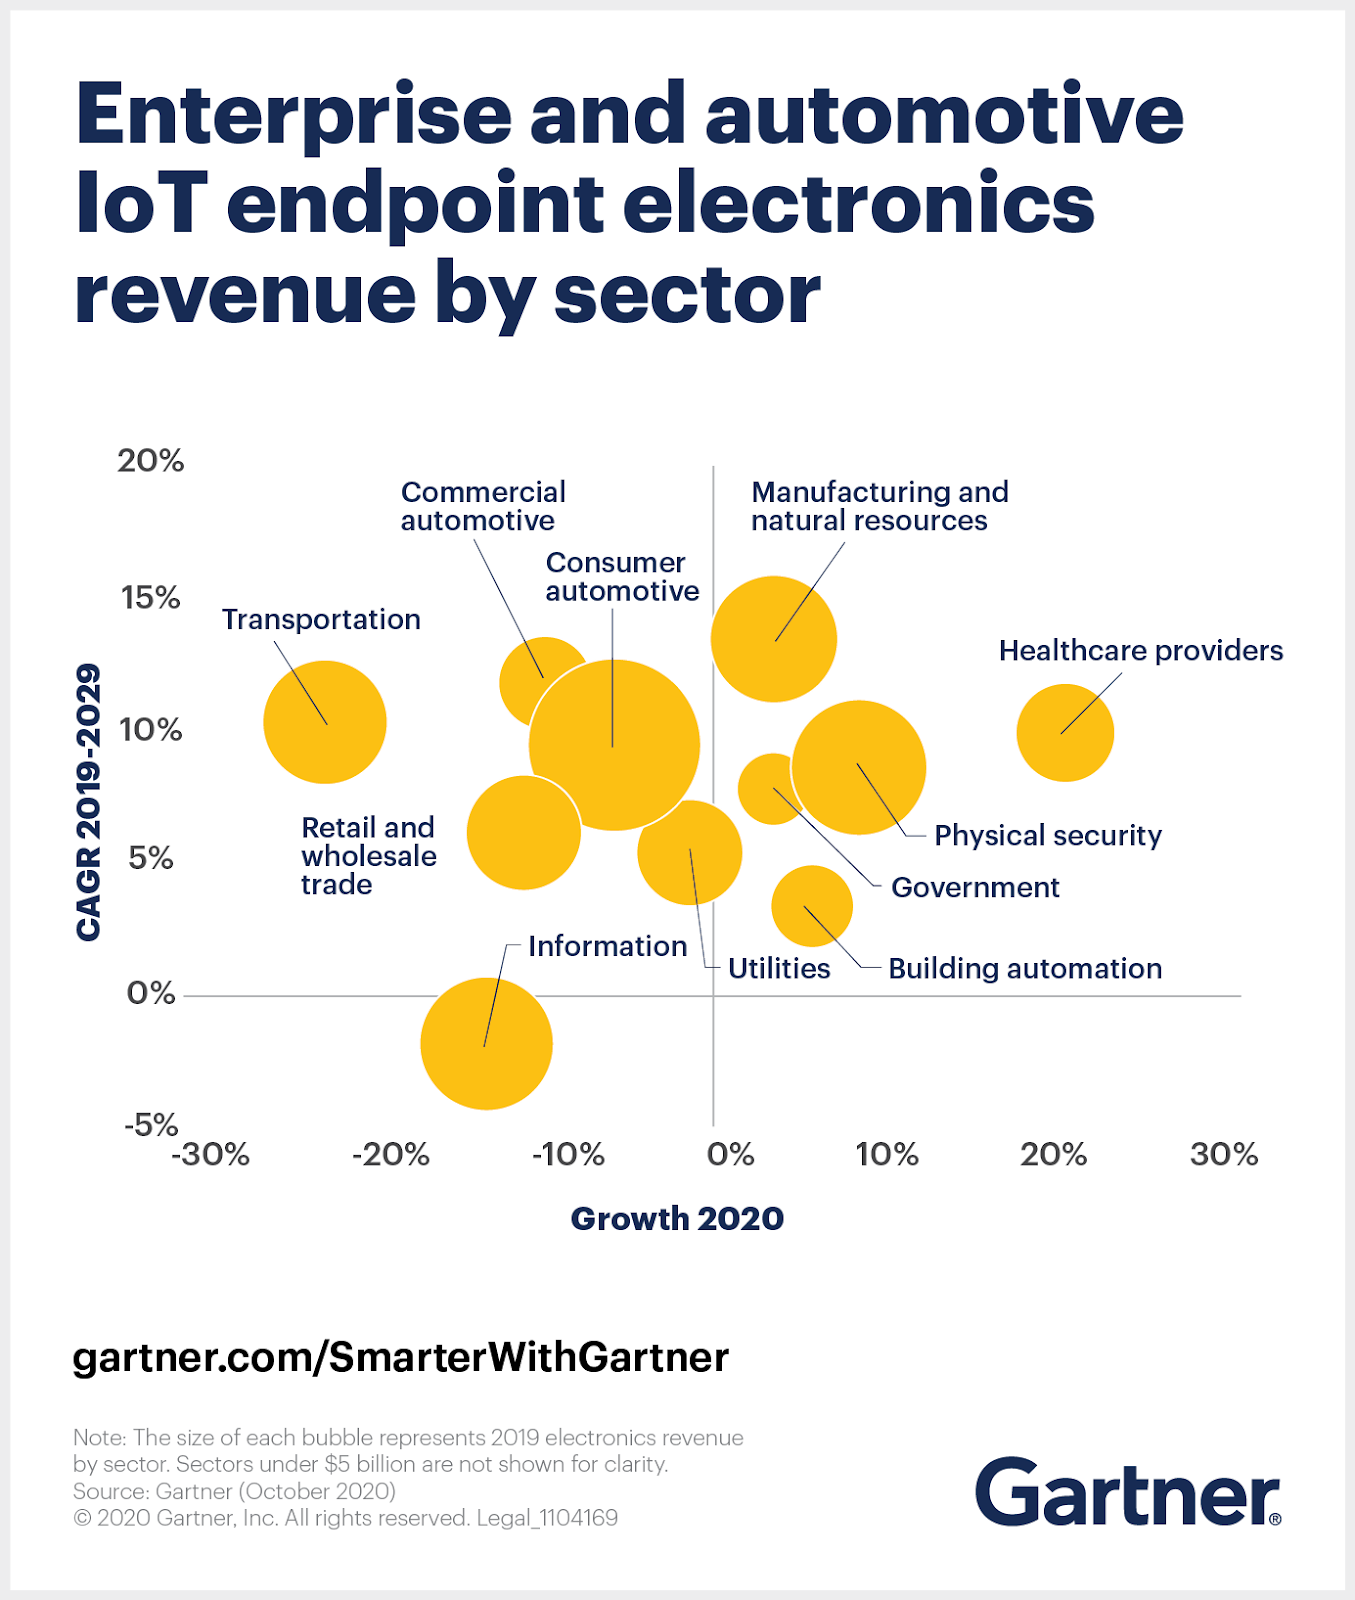 Enterprise and automotive IoT endpoint electronics revenue by sector which shows that healthcare providers' IoT endpoint revenue will grow 20% in 2020.